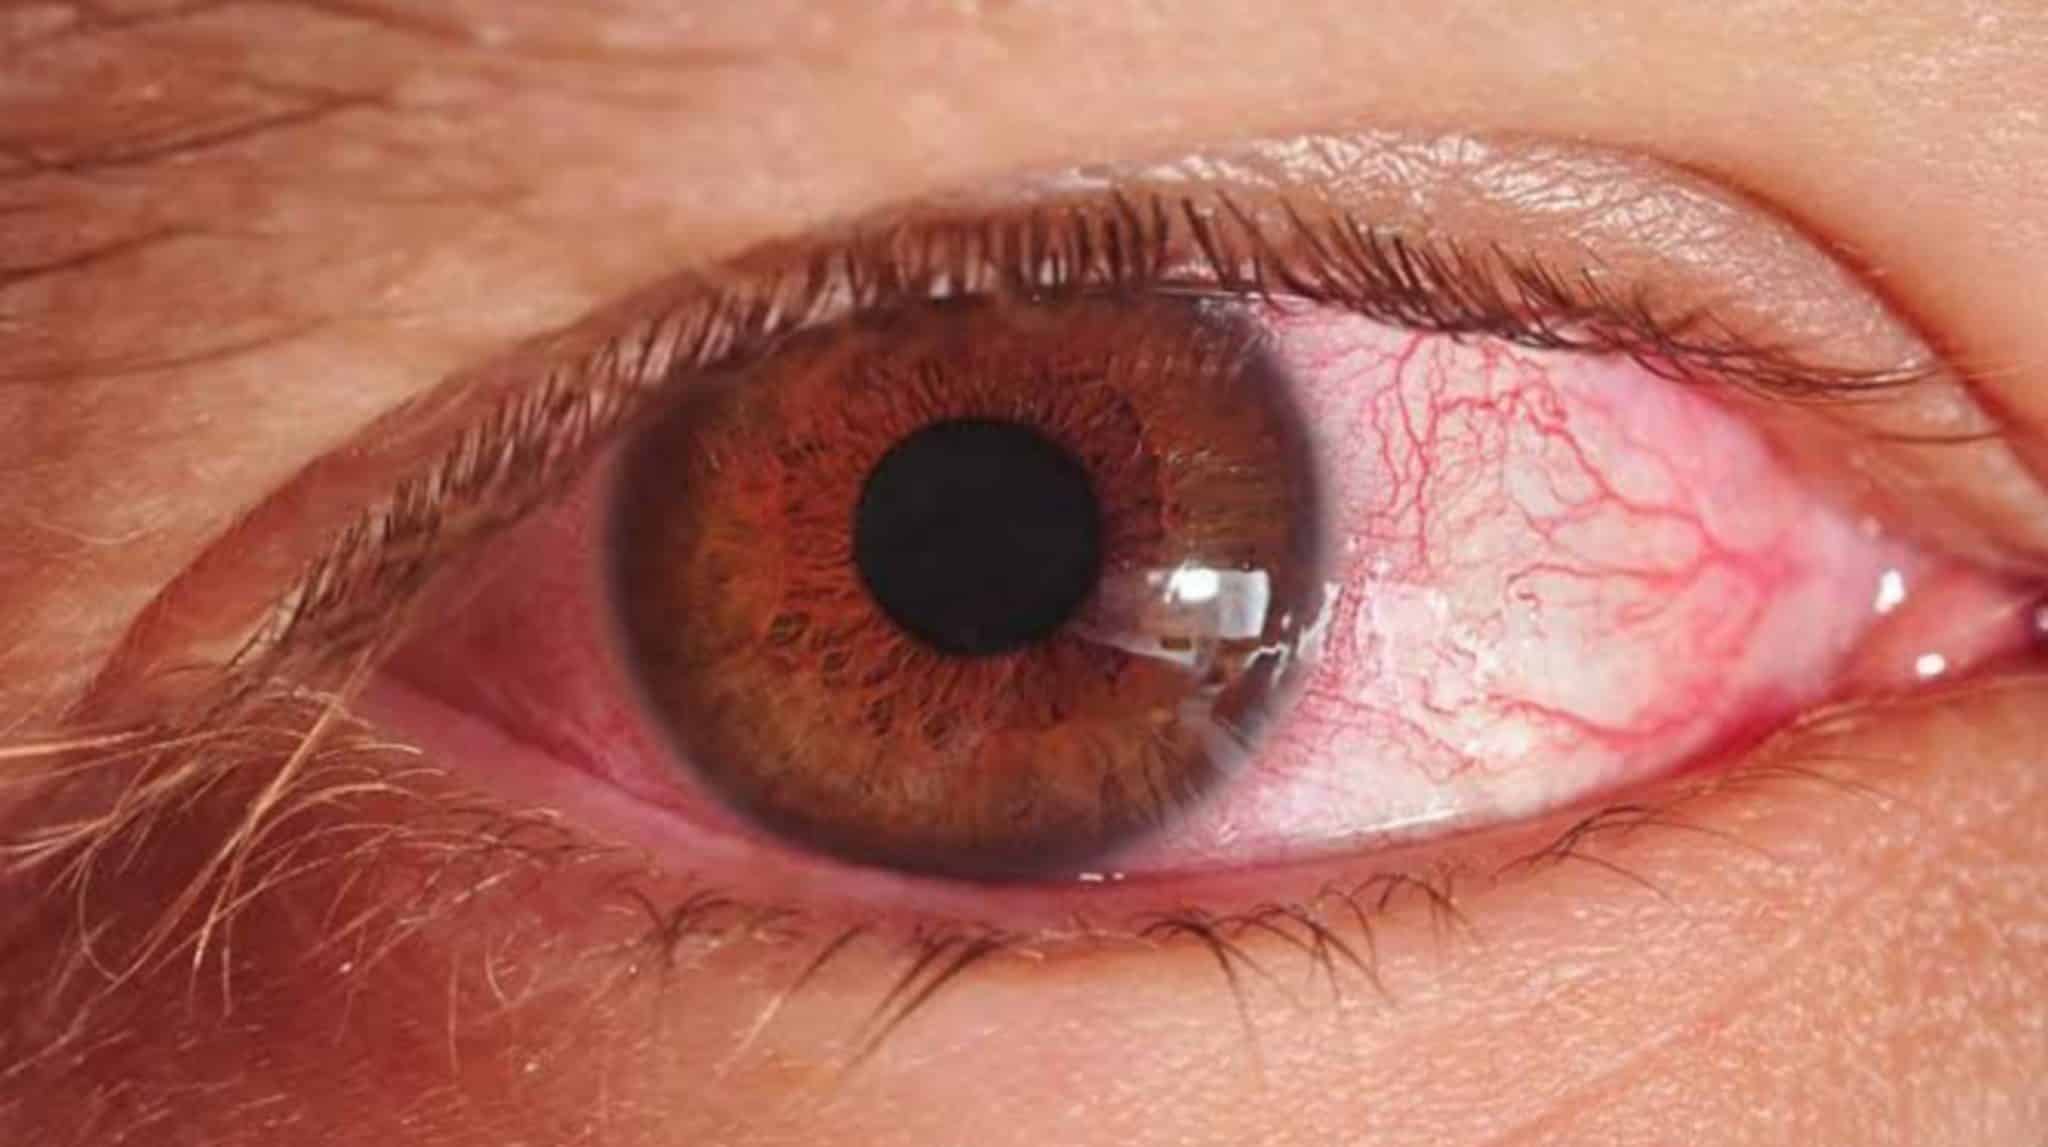 Sindh Issues Warning to Control Pink Eye Infection Outbreak in Karachi